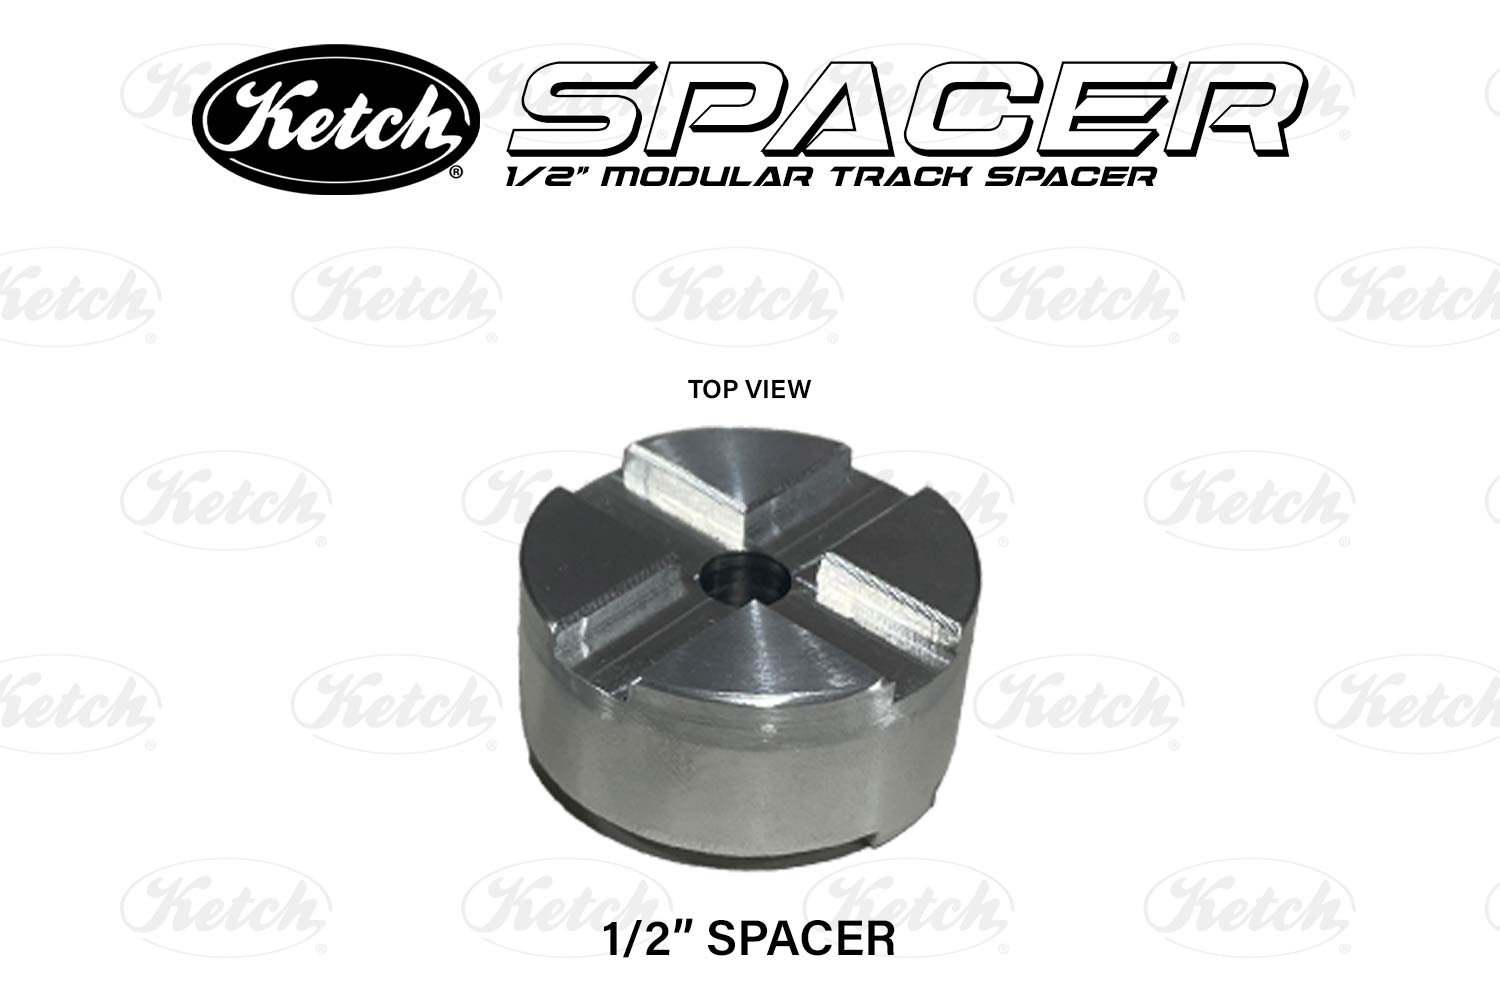 Ketch Products Half Inch modular track spacer to elevate your Ketch Krossbar for mounting on kayaks.